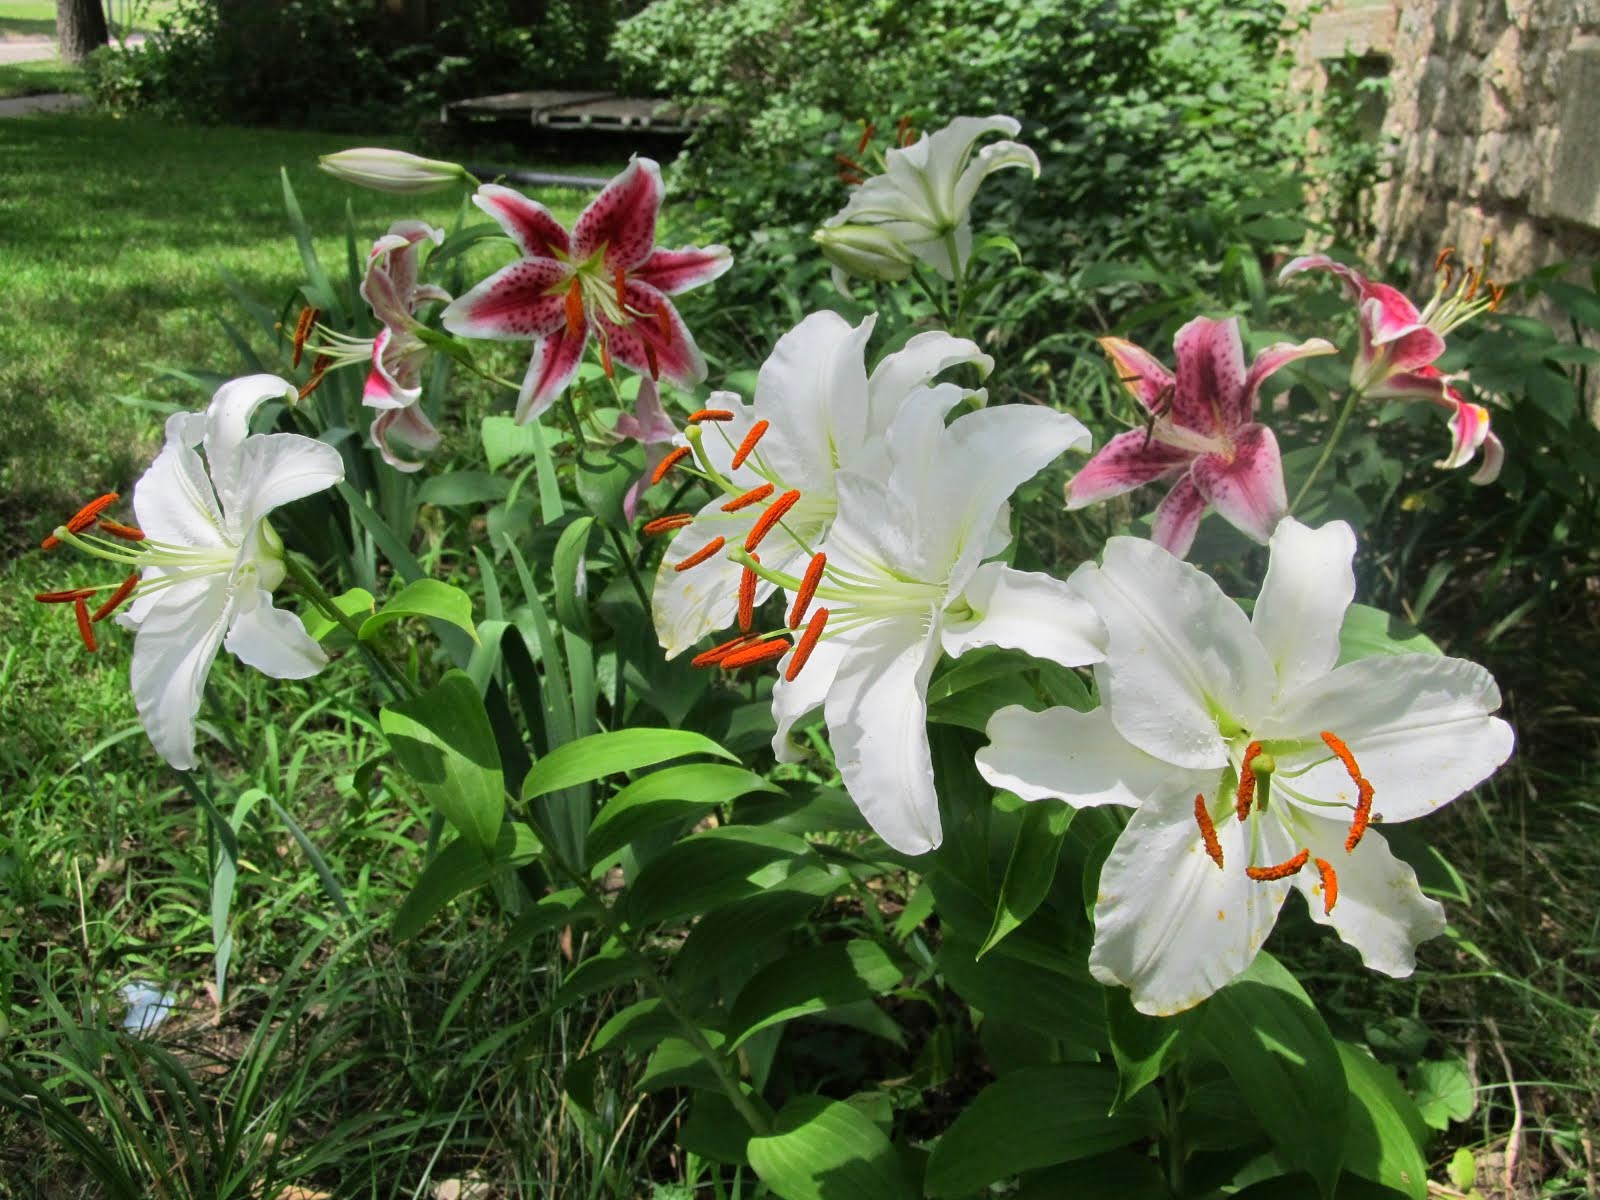 HOME HAVEN LILIES ON THE PRAIRIE